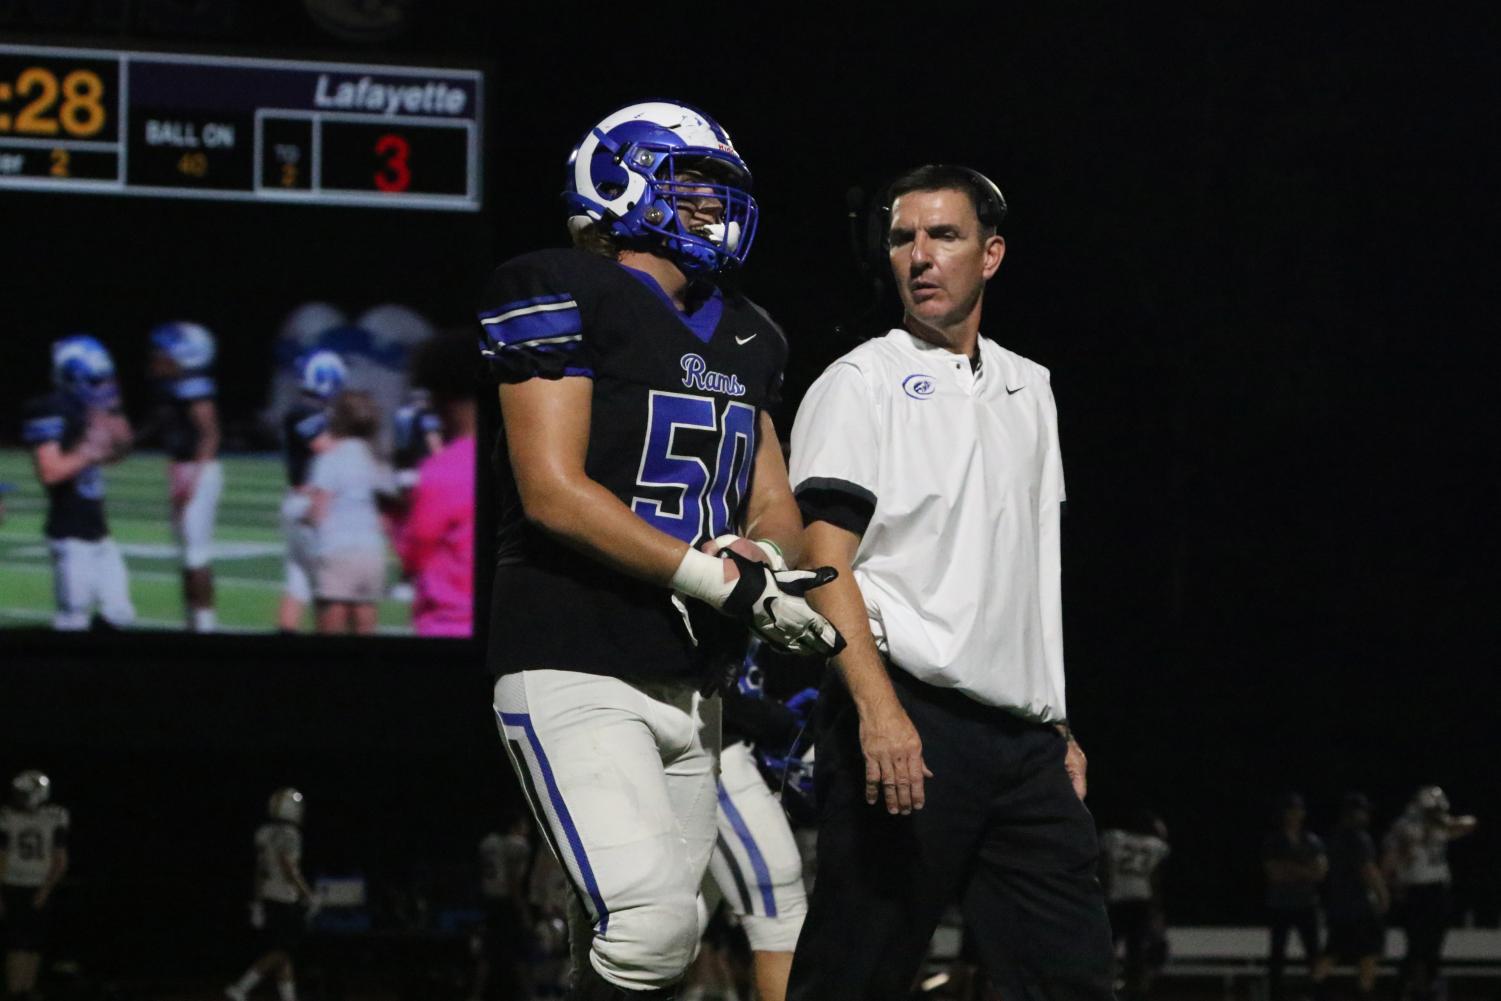 Ladue+varsity+football+wins+against+Lafayette+in+Oct.+8+game